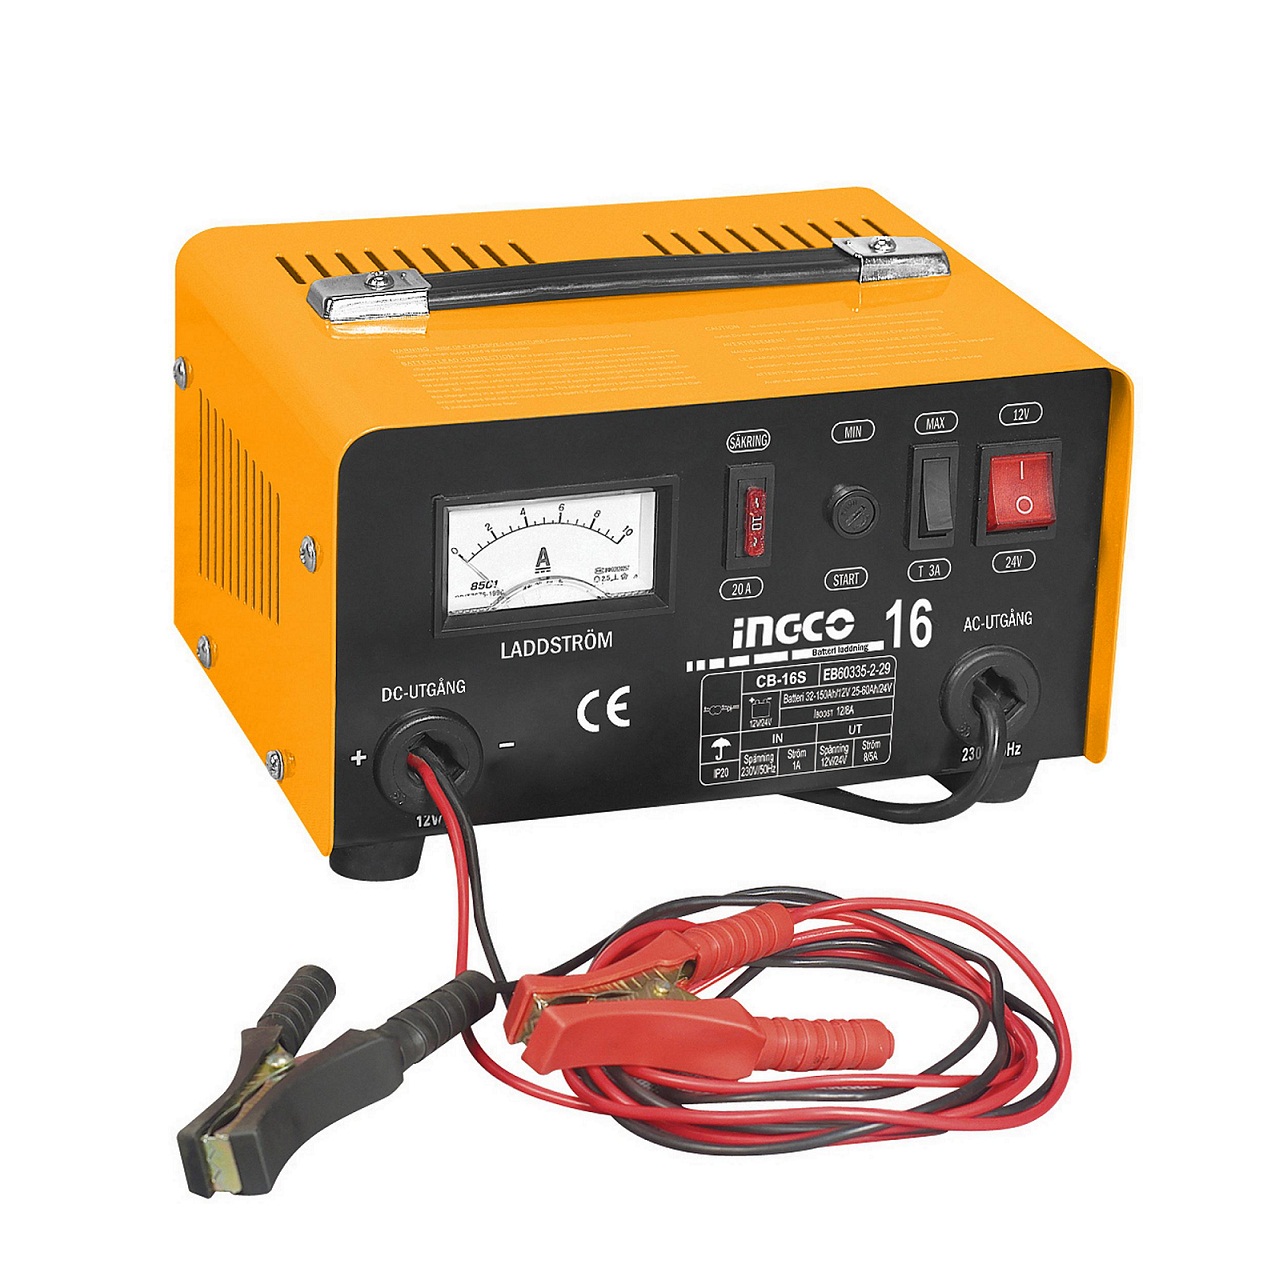 INGCO BATTERY CHARGER 6/12V 6A -ING CB1501 - UNIVERSAL TRADING - COLOMBO